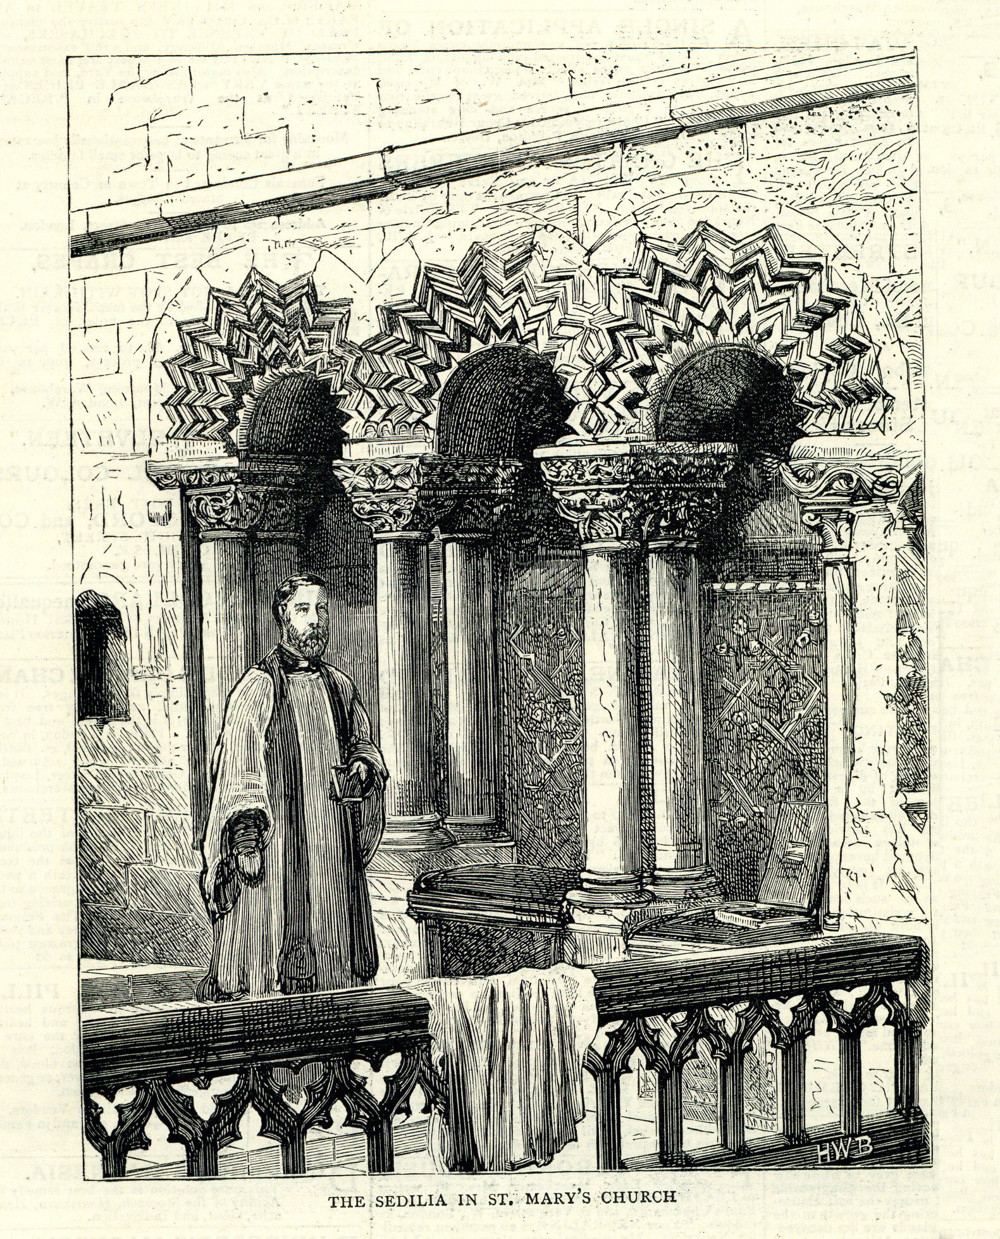 The Sedilia in St Mary’s Church, The Graphic, May 27th, 1882, p536. Etching Print, signed HWB